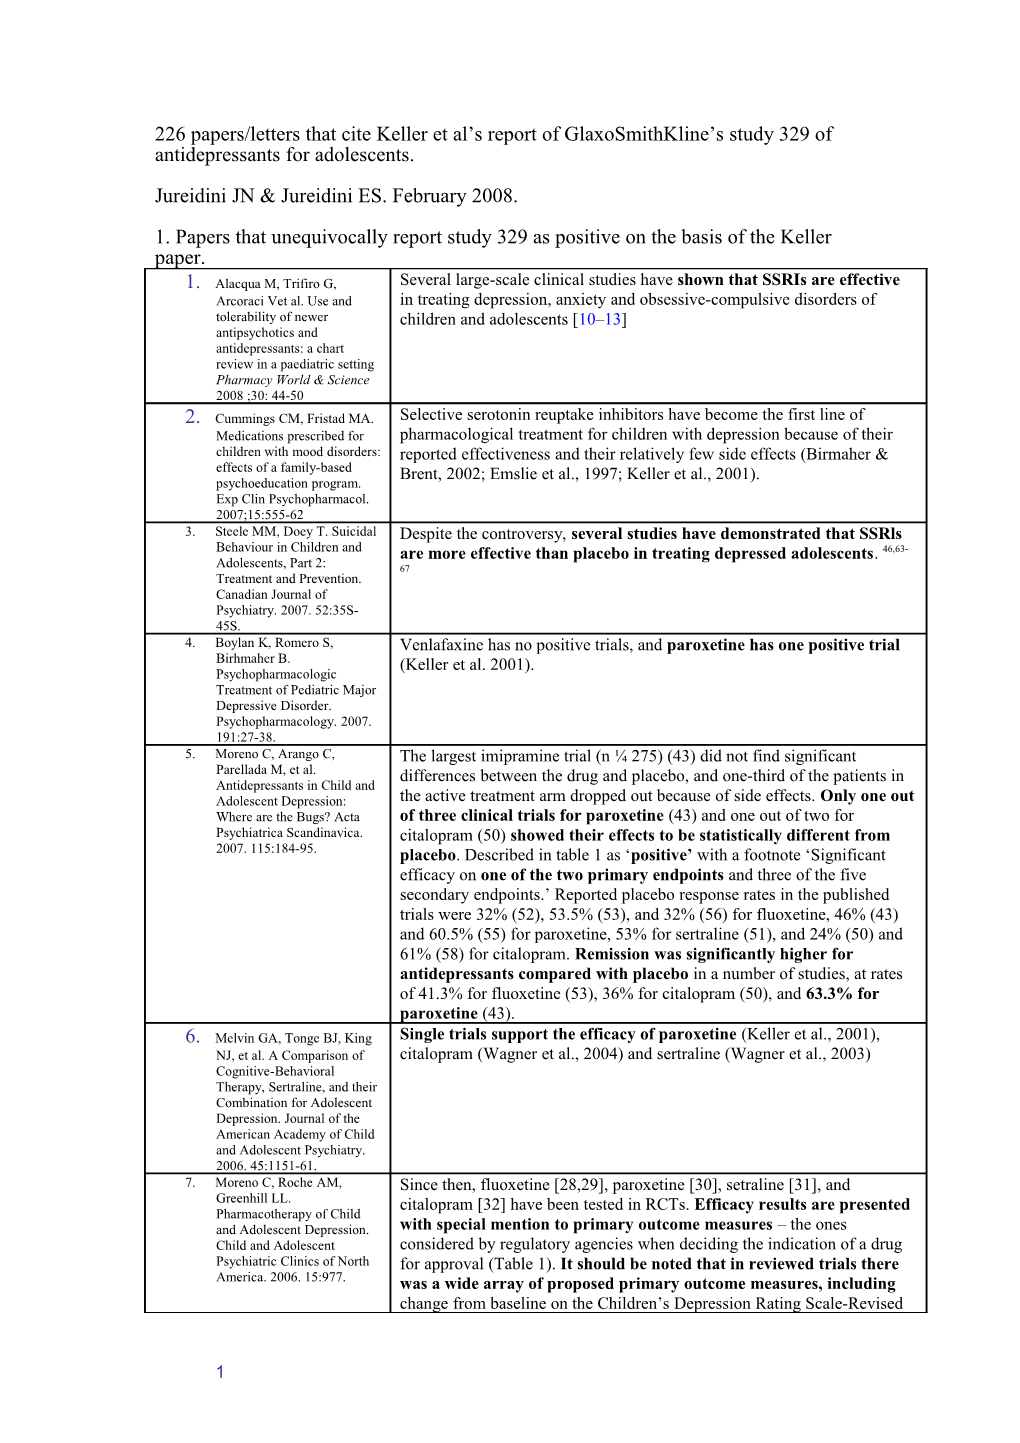 Appendix 7 Analysis of 220 Papers/Letters That Cite the Keller Paper